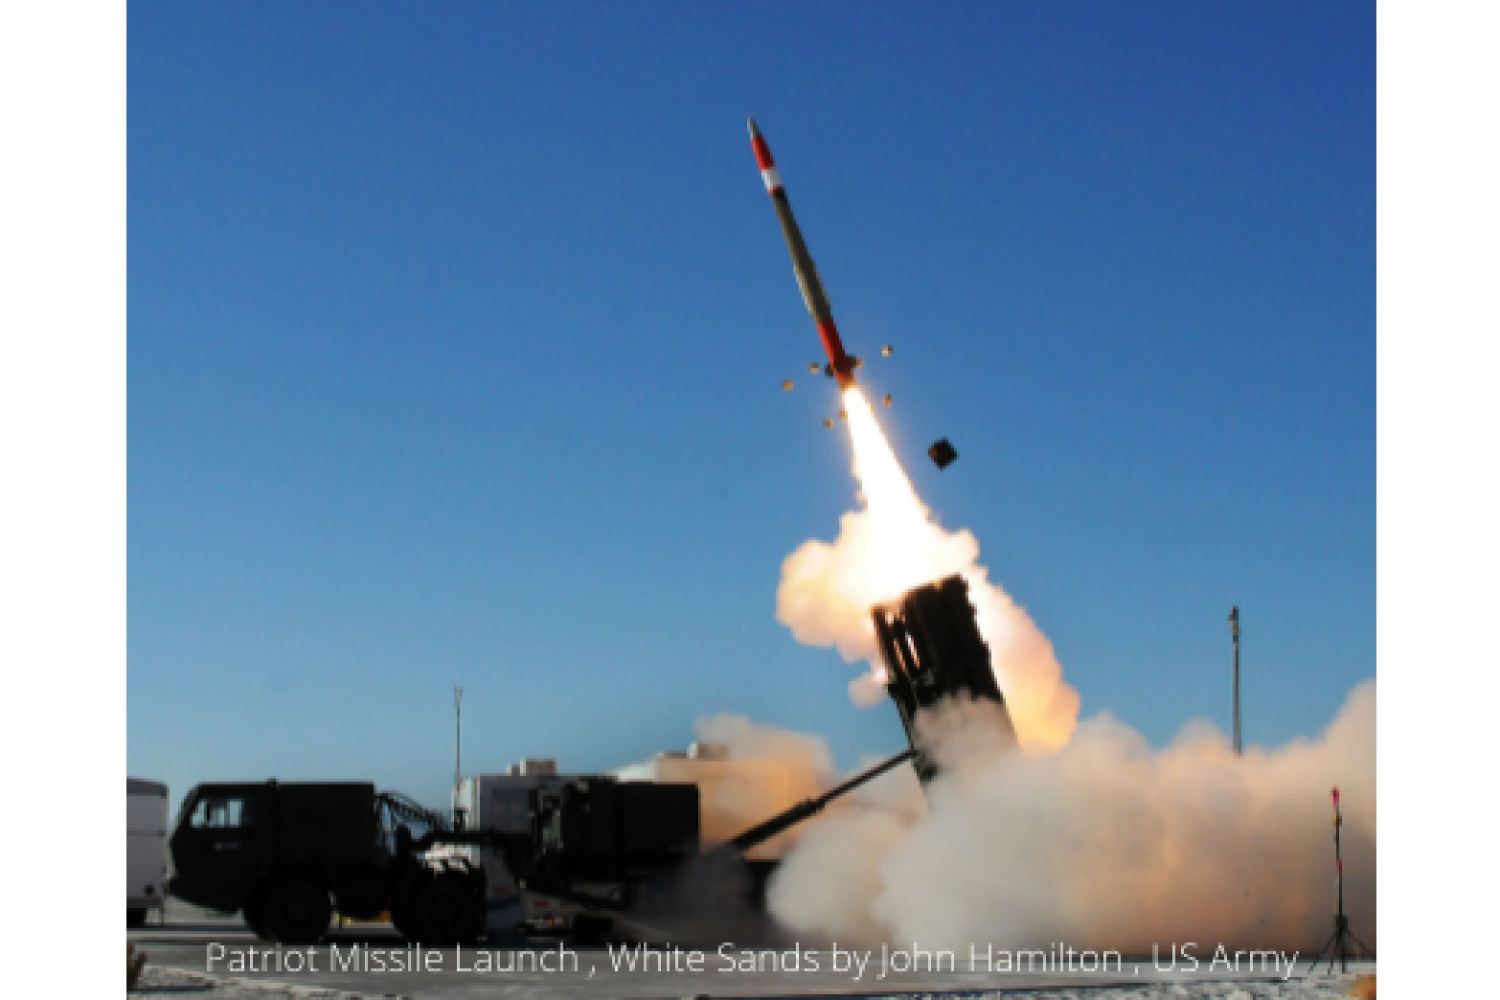 Patriot-Missile-Launch-White-Sands-by-JohnHamiilton-US-Army-555-×-348-px